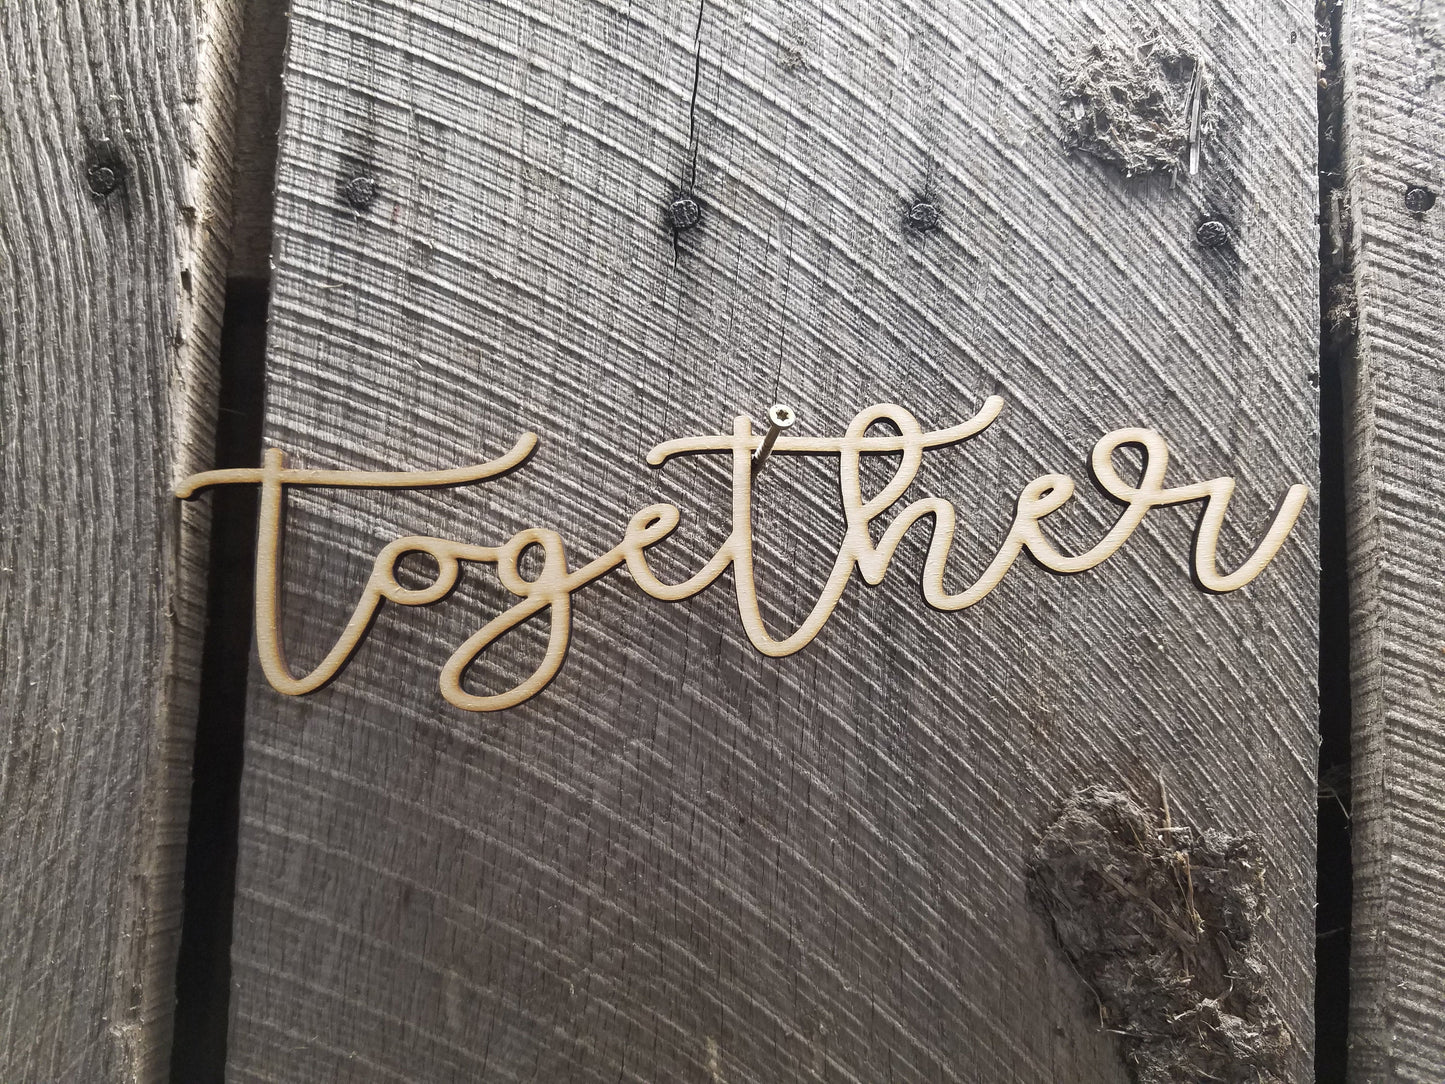 Together, Script, Text, Laser Cut Out, Sign, Cutout, DIY, Wood Word, Craft, Laser Cut Wood Word, Wooden, Decor, Birch